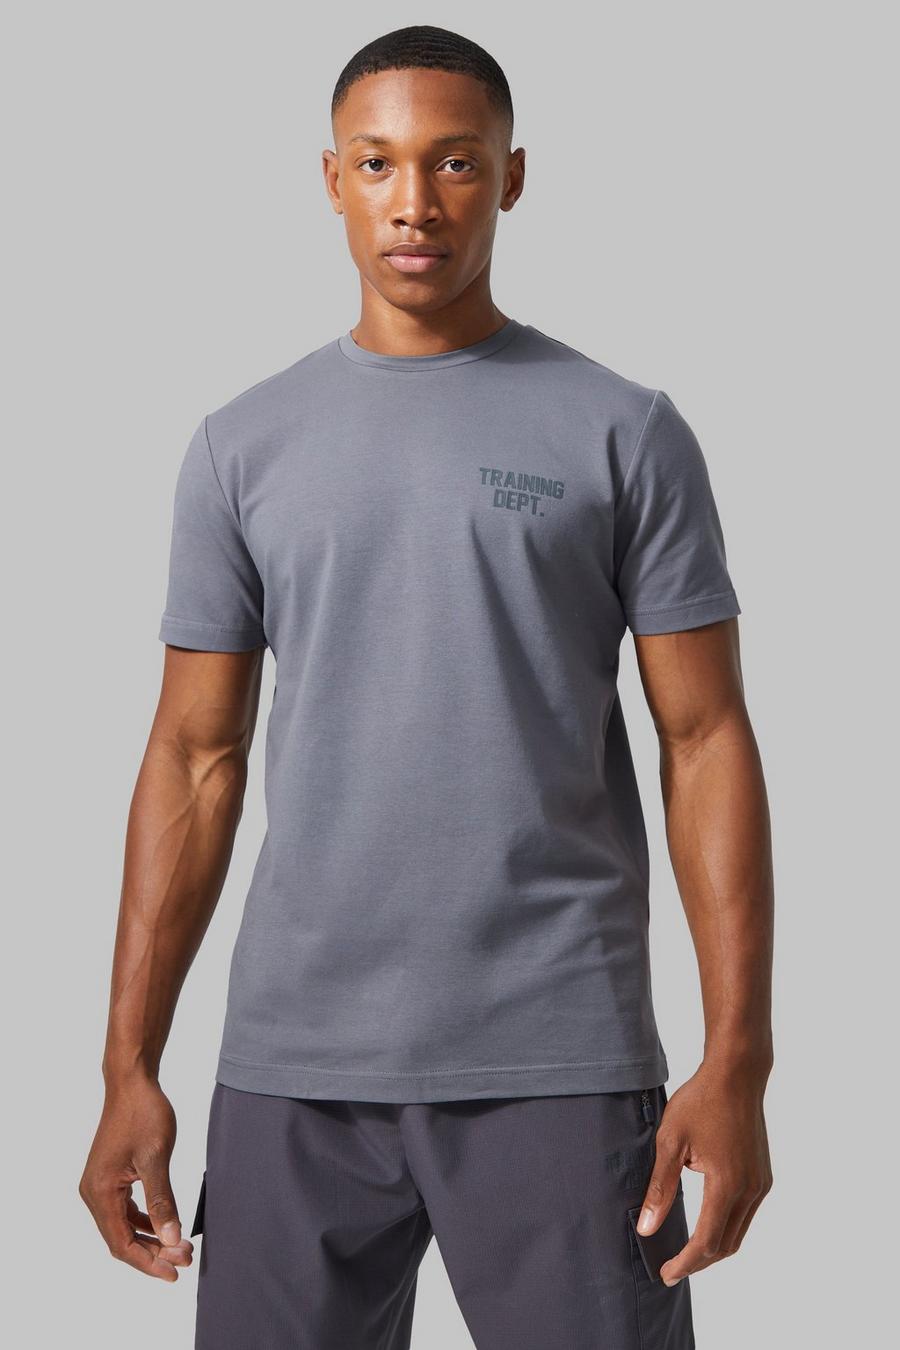 Charcoal grey Active Slim Fit Training Dept Performance T-Shirt